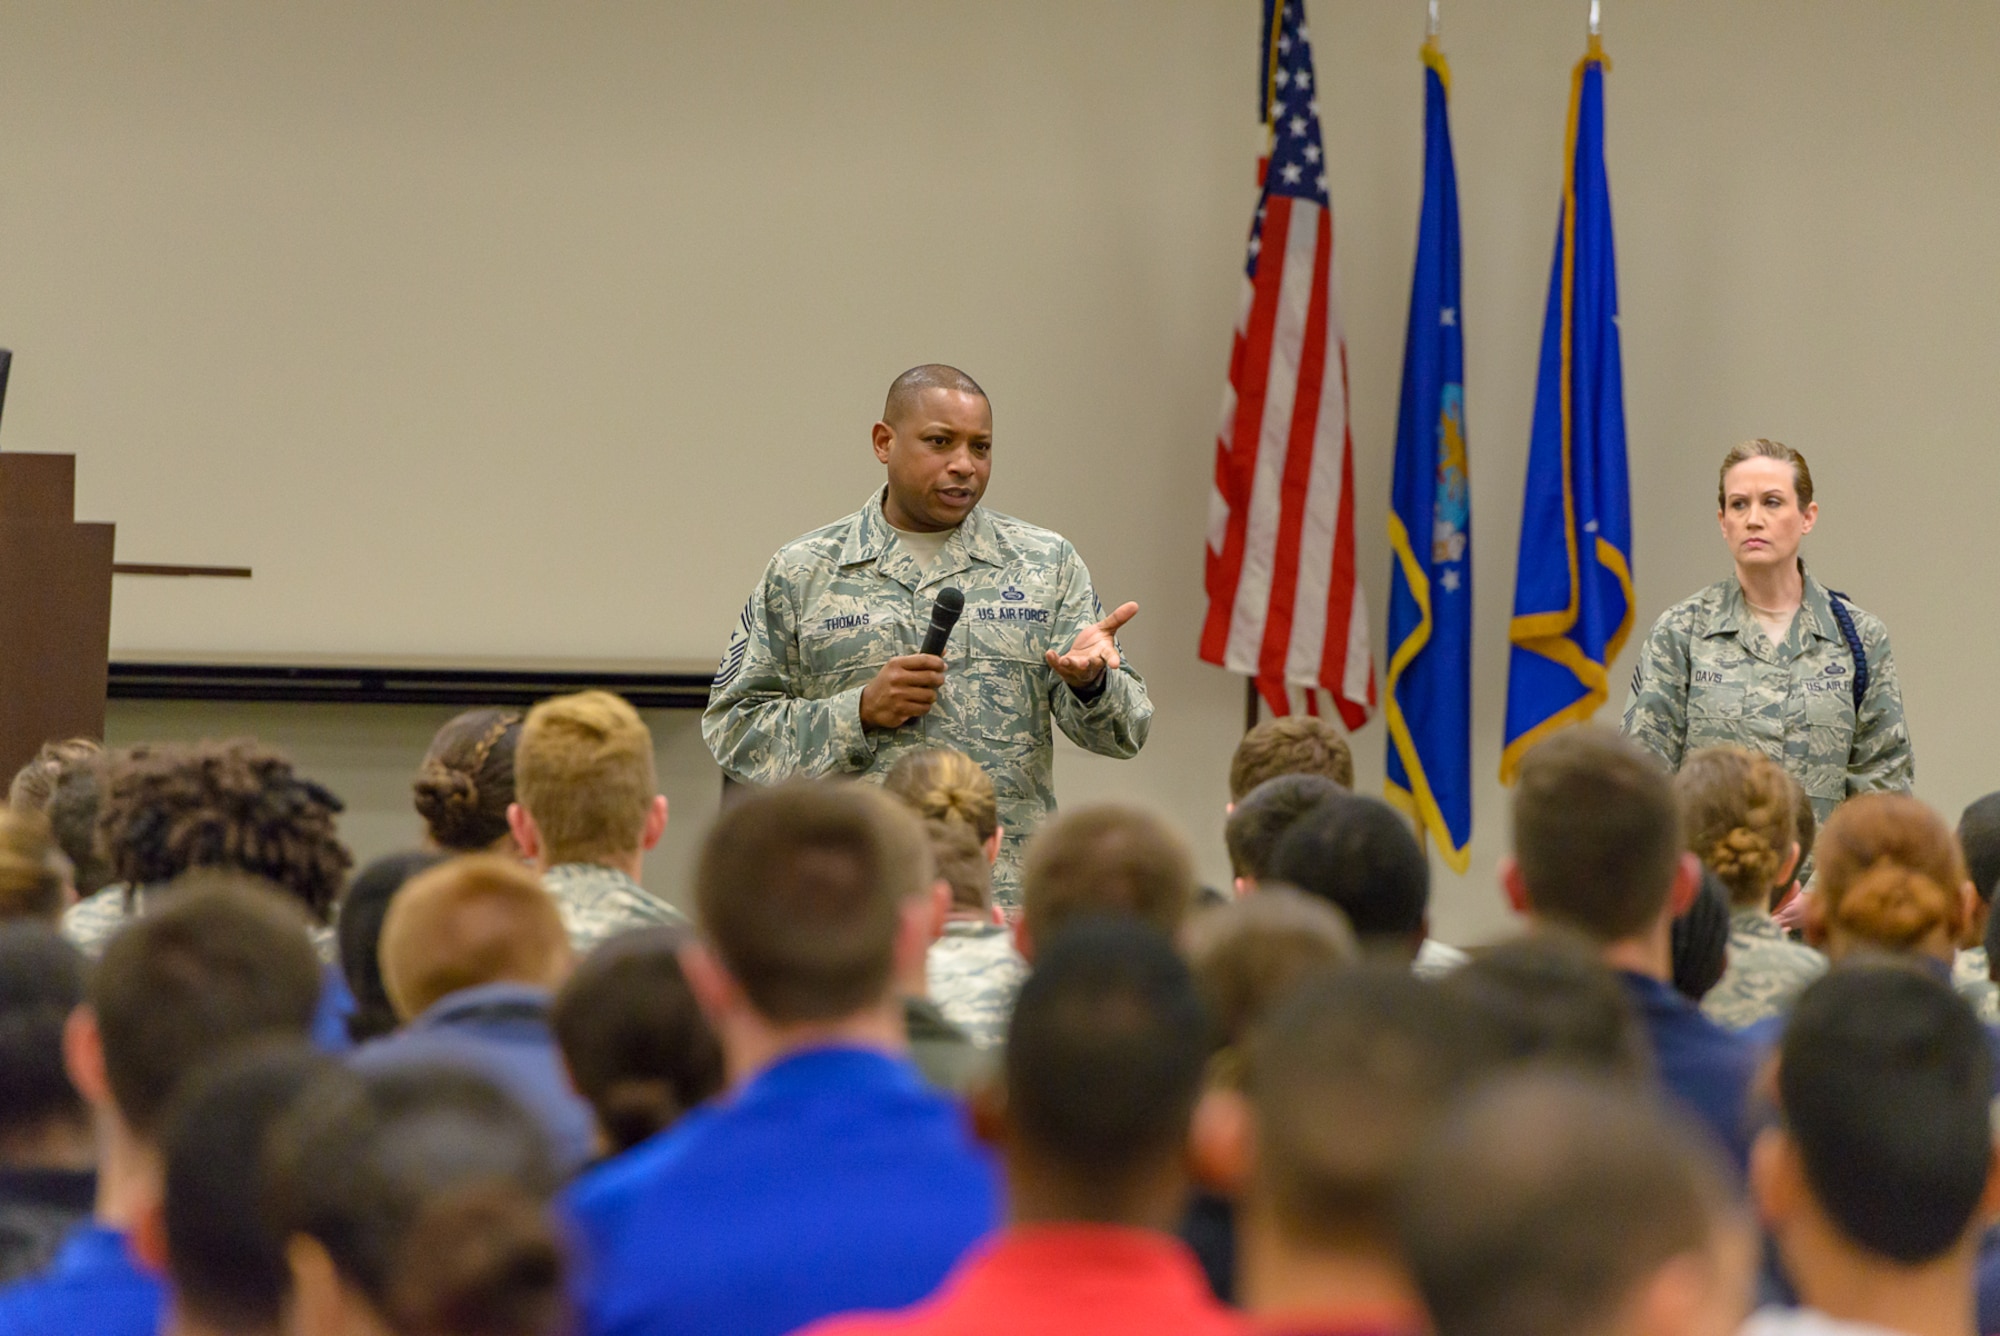 U.S. Air Force Chief Master Sgt. Farrell Thomas, 2nd Air Force command chief master sergeant, mentors Air Force ROTC cadets as part of the senior enlisted panel held during Pathways to Blue April 7, 2018, on Keesler Air Force Base, Mississippi. Keesler was home to 280 cadets from 15 universities April 6-7 as part of Pathways to Blue, a diversity outreach event hosted by the 2nd Air Force.  (U.S. Air Force photo by Andre’ Askew)